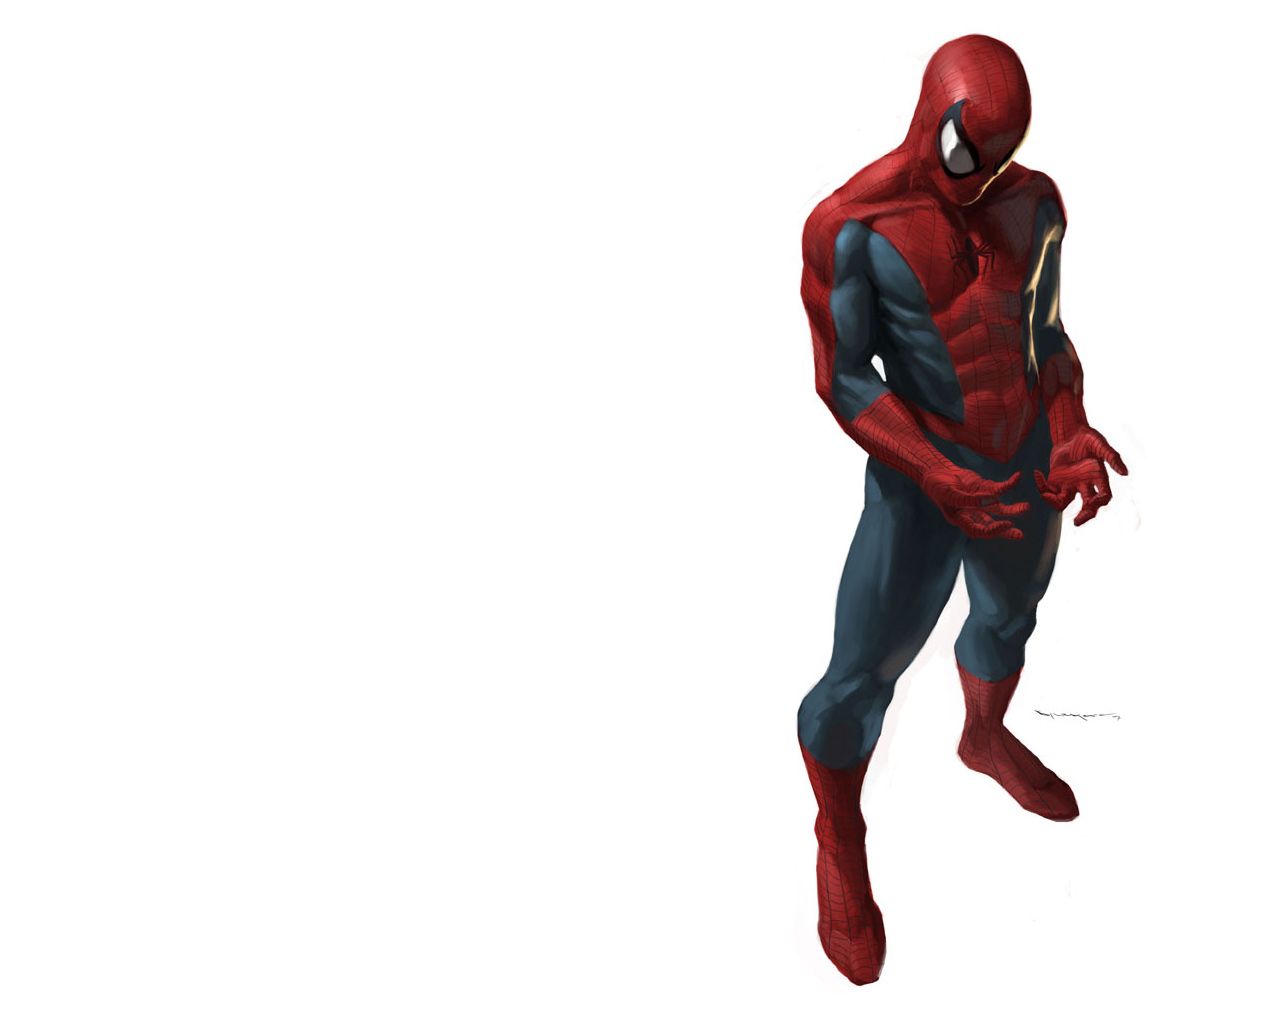 Marvel comics spider man wallpaper - - High Quality and other